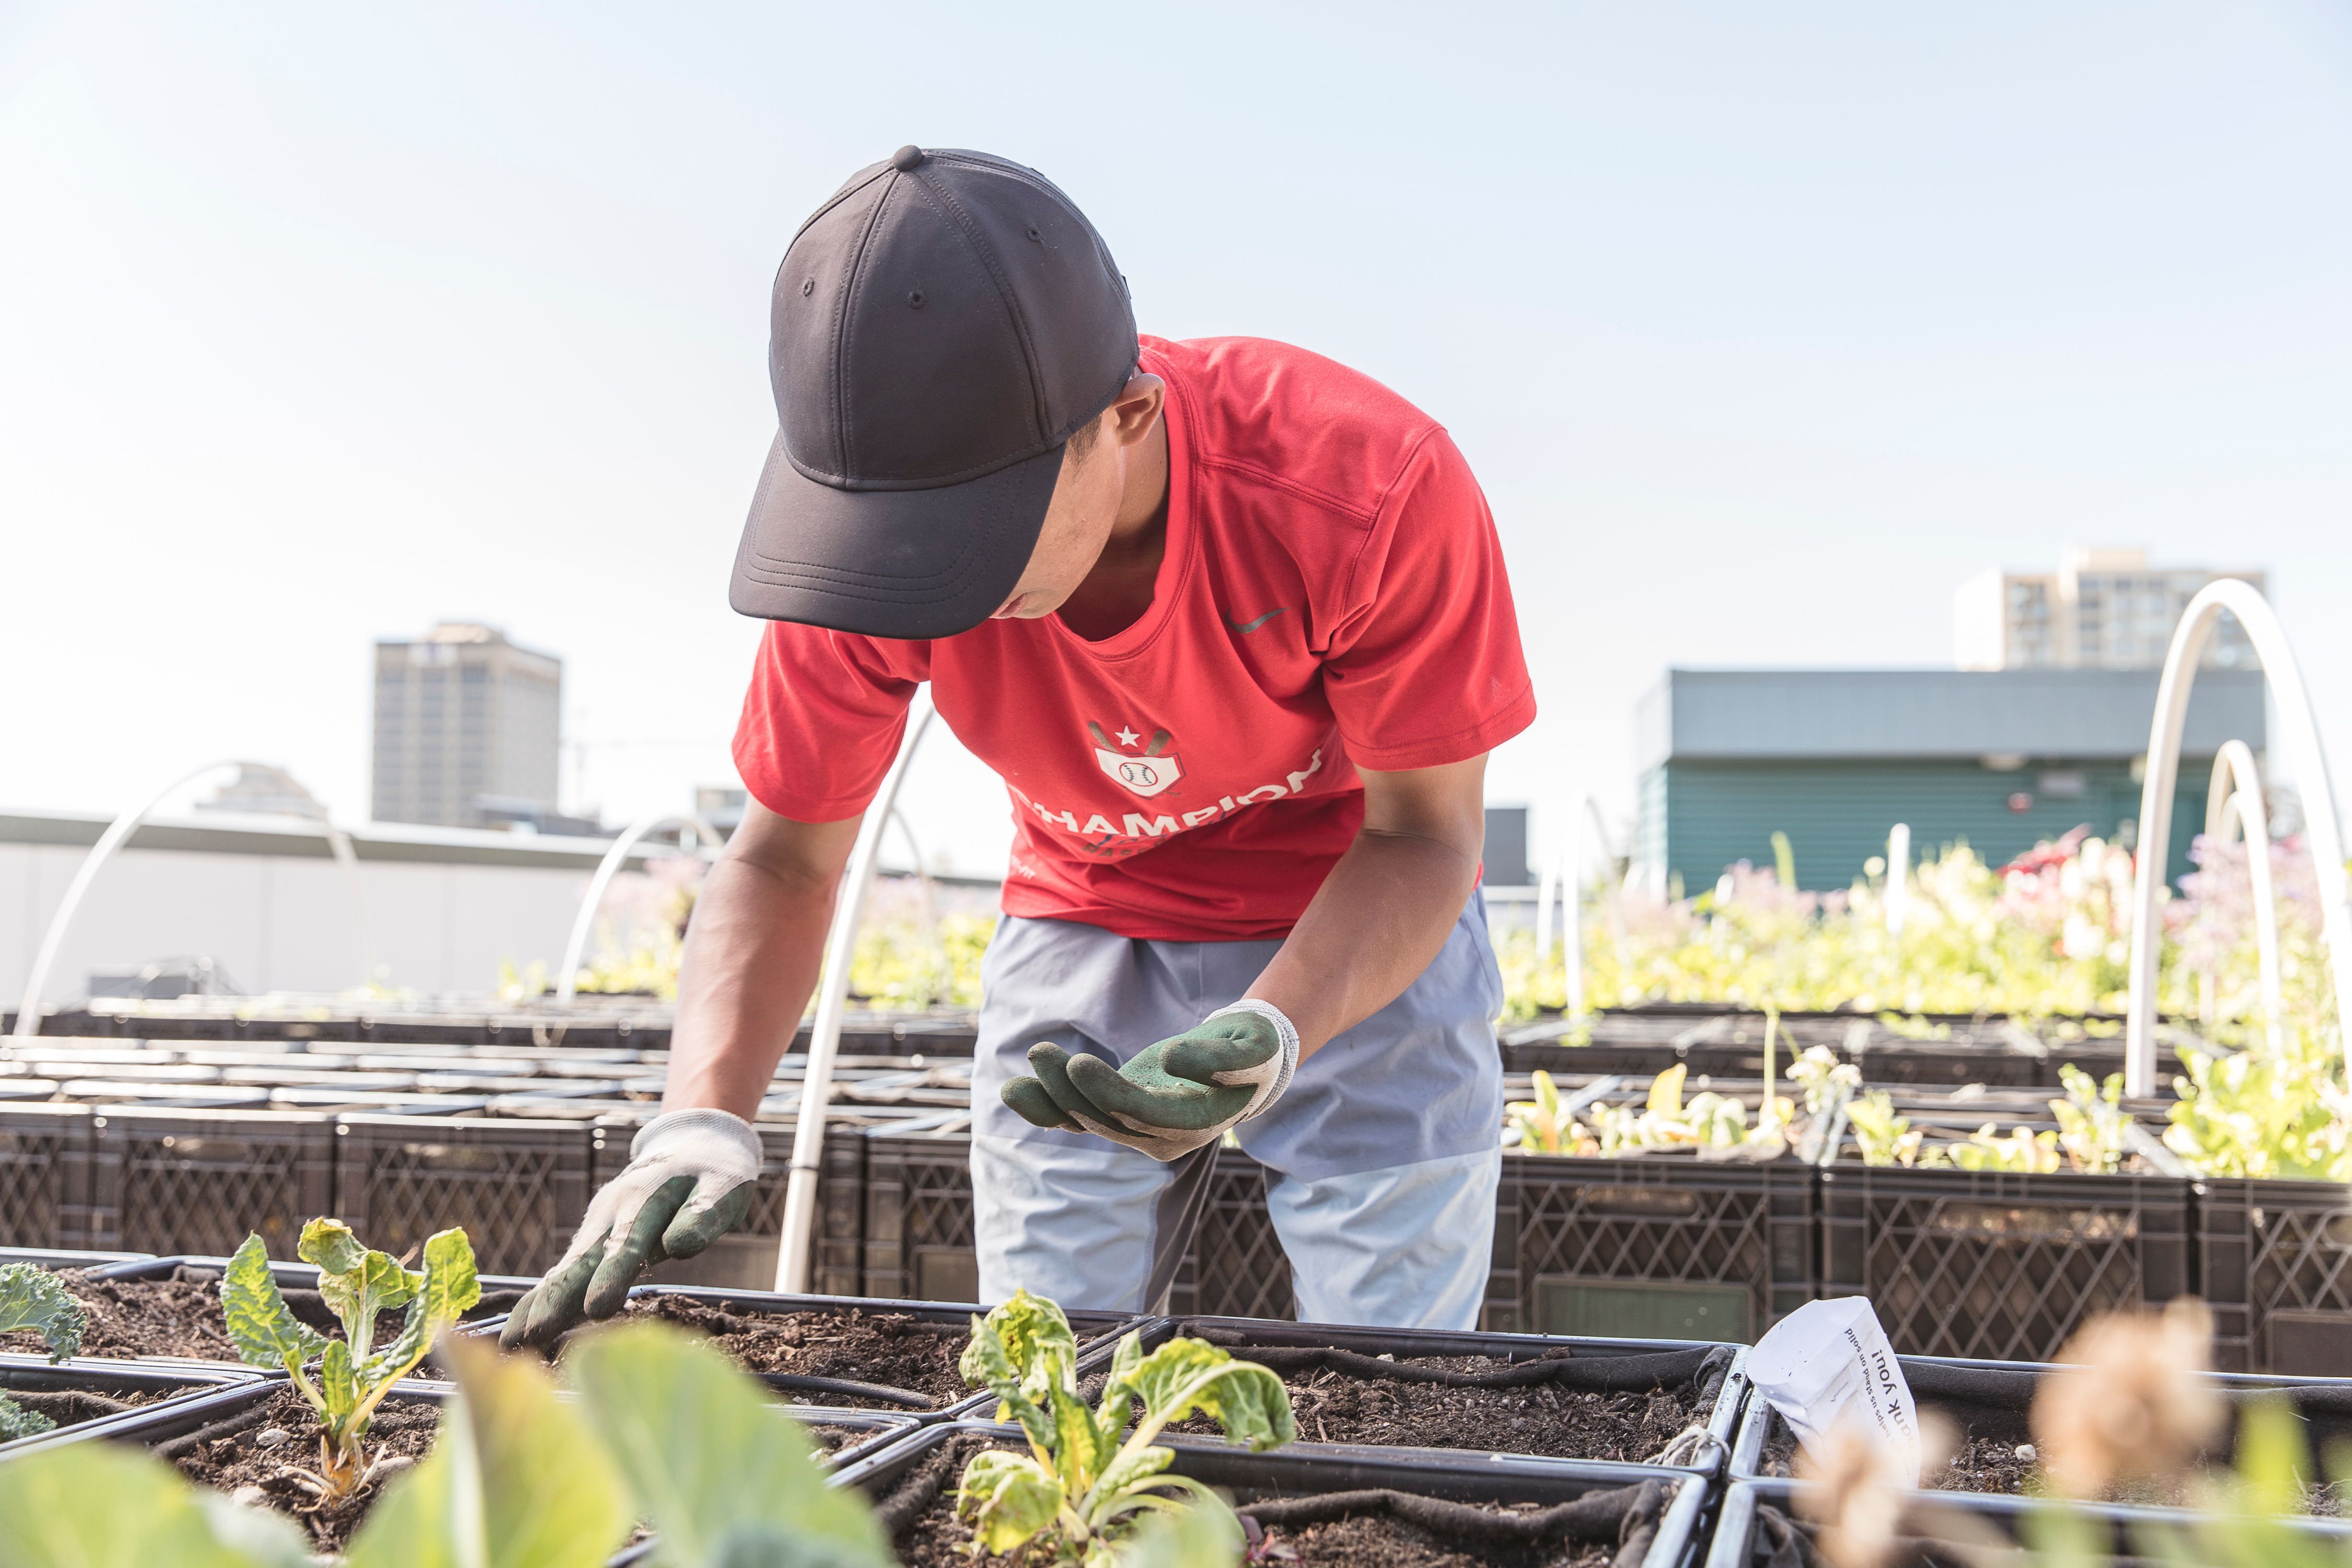 A summer intern works in the Food Bank's garden. The volunteer gardening internship is offered to middle schoolers from Food Bank families who want to learn to grow their own food.